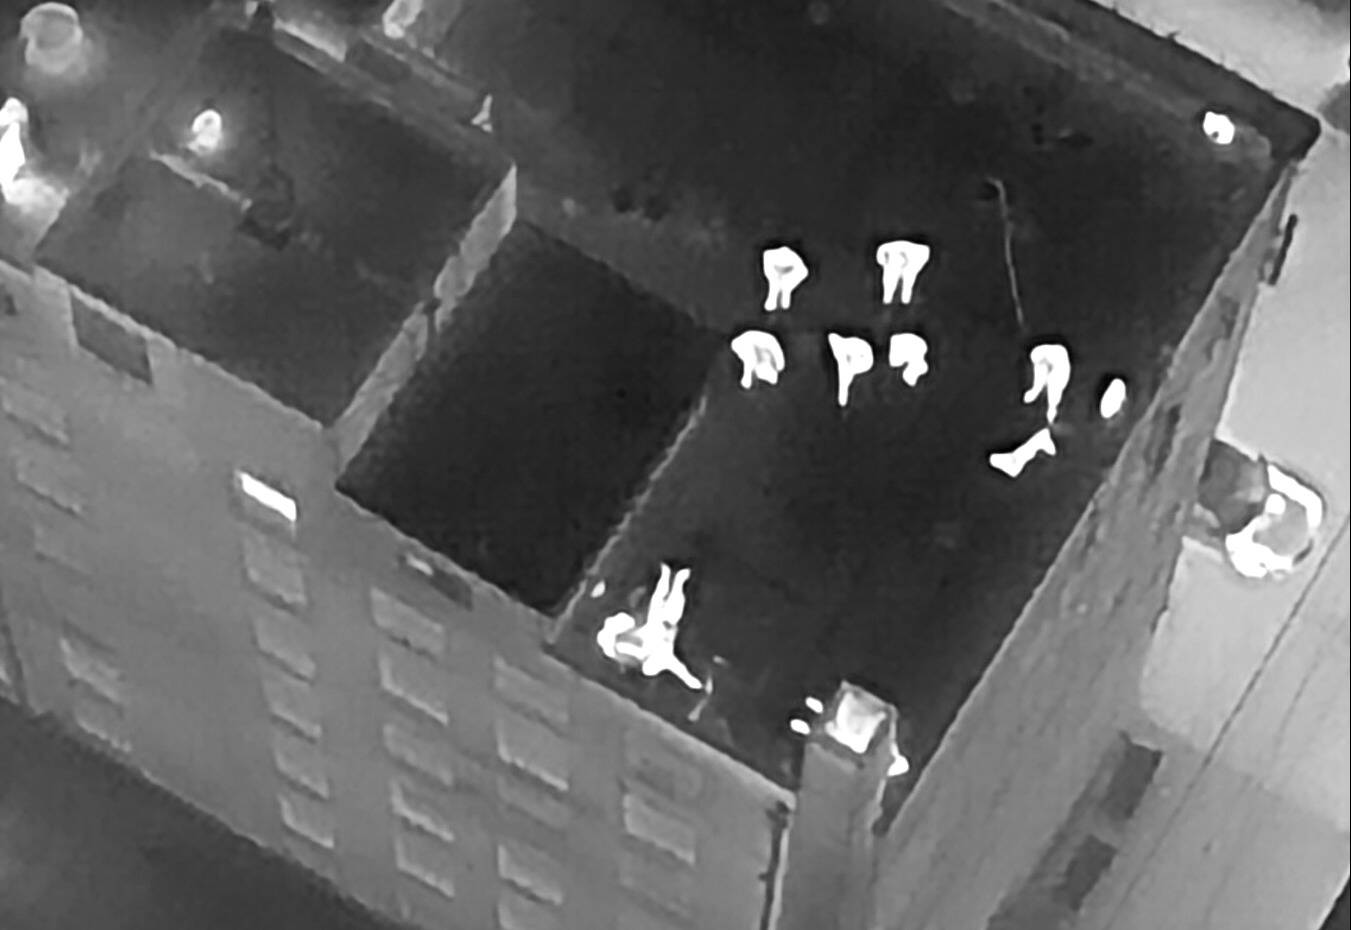 Drone footage from the Aberdeen Police Department was used to locate and detain two men on the roof of a building downtown suspected of burglary on Saturday morning. (Courtesy photo / APD)